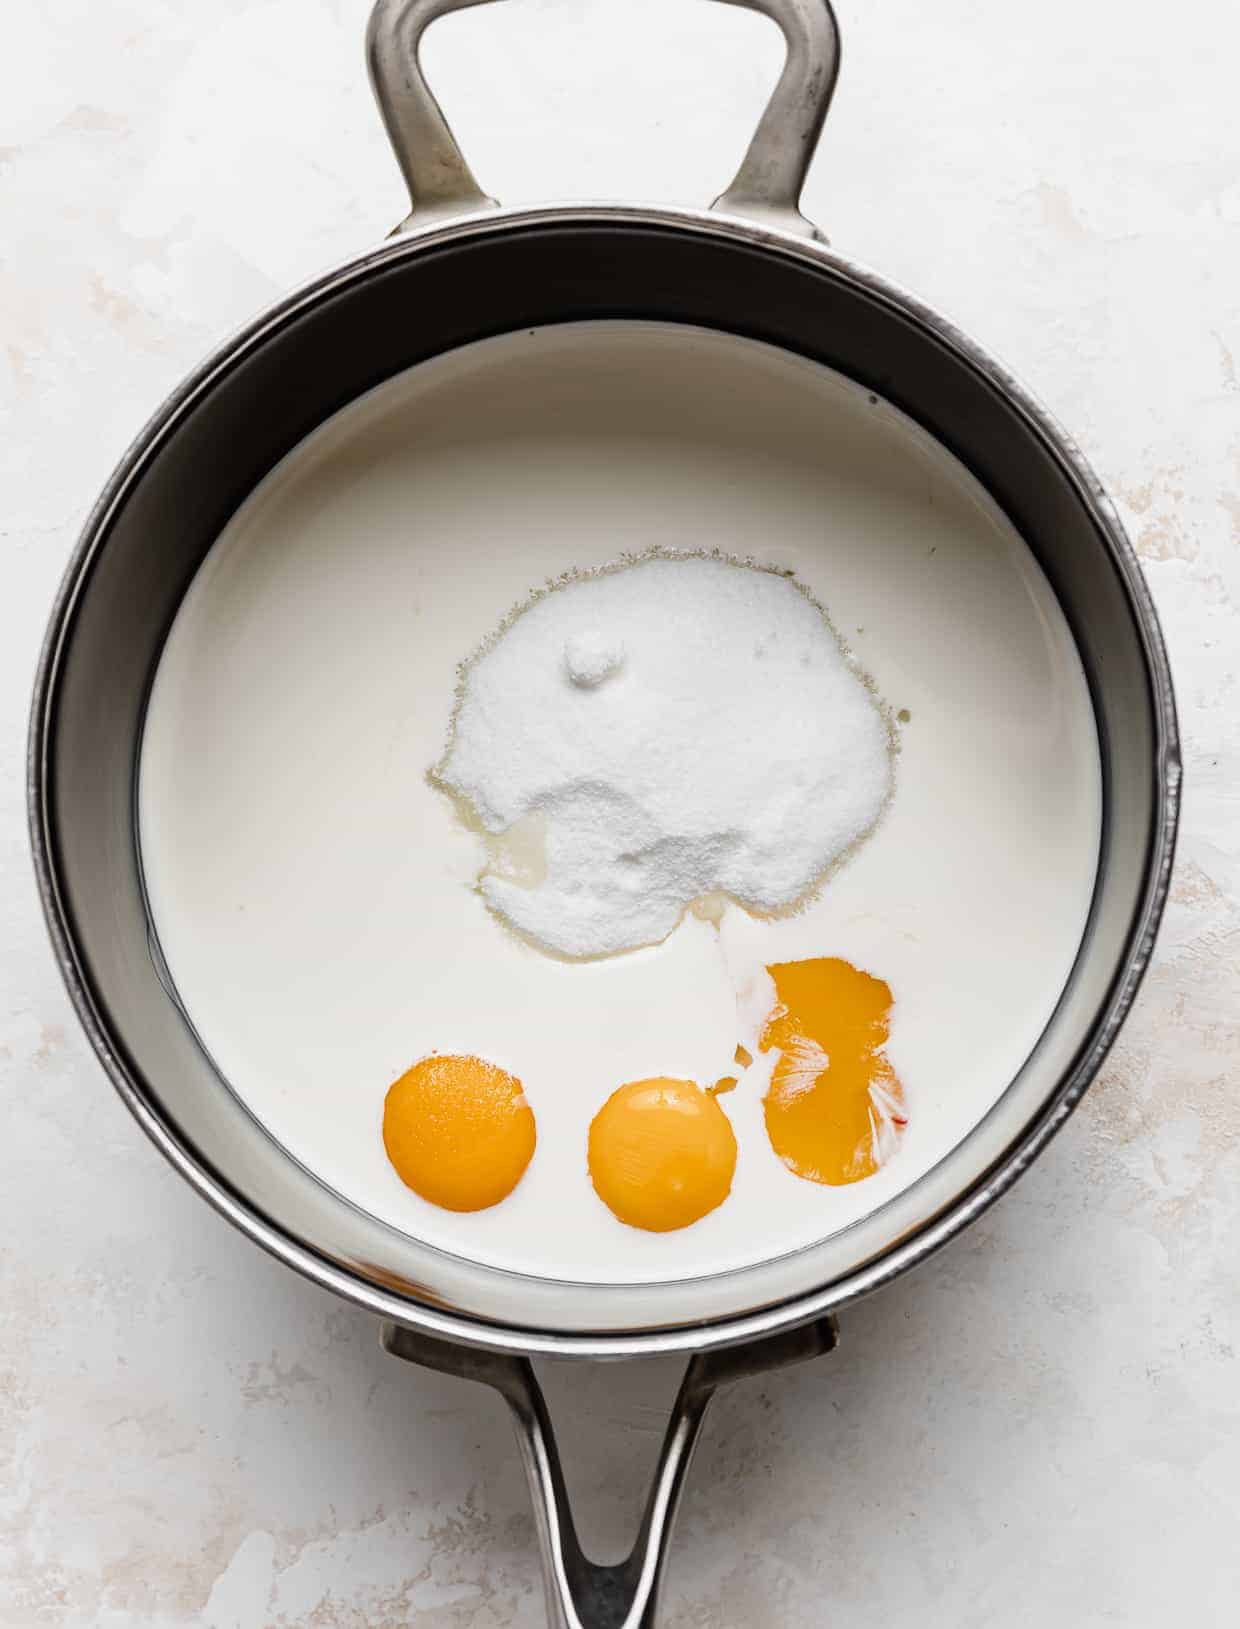 A black saucepan with heavy cream, sugar, and 3 egg yolks in it.